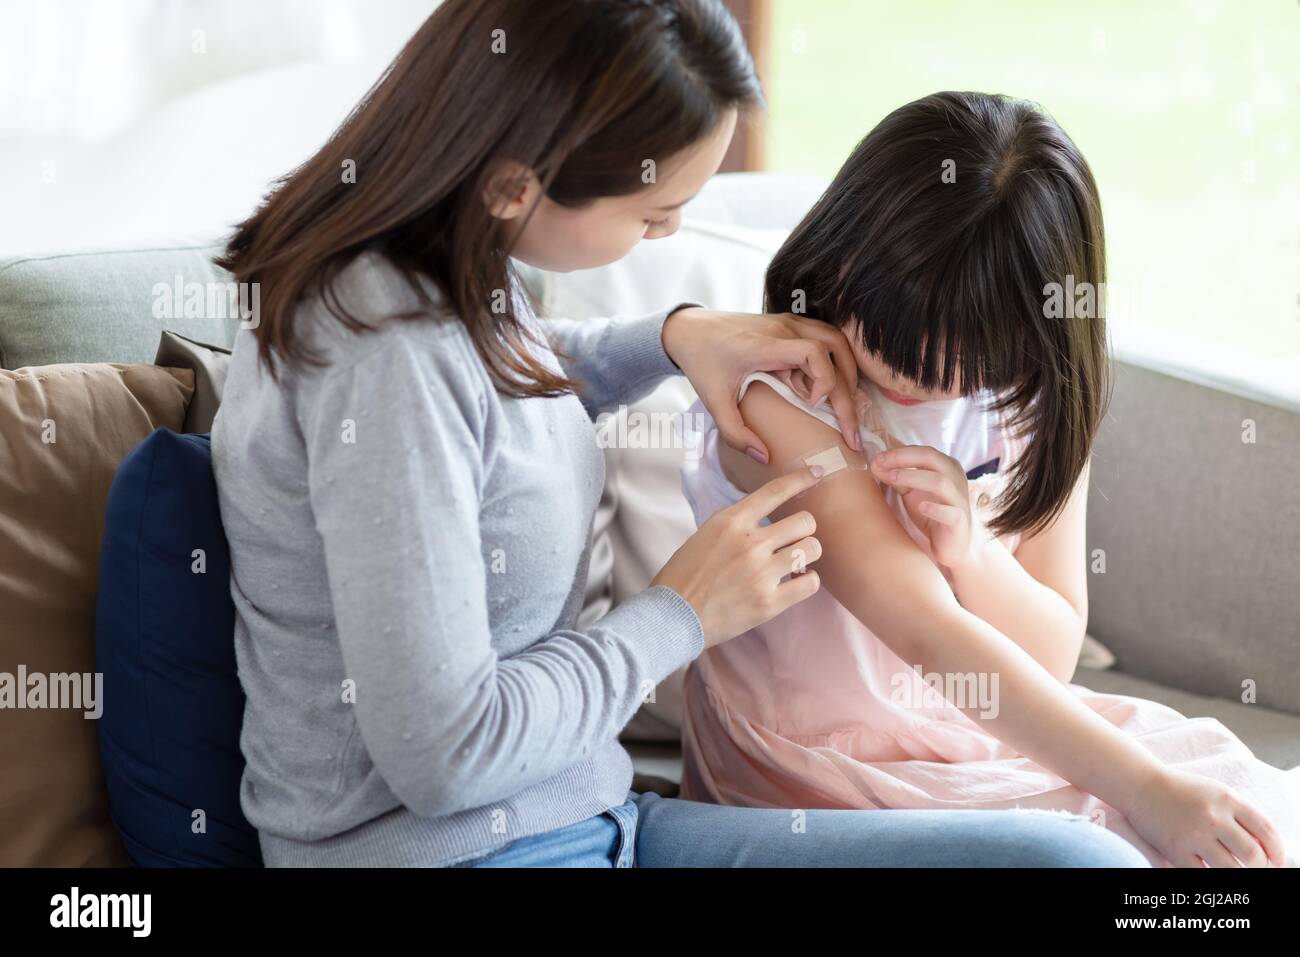 Asian mother putting court plaster adhesive bandage onto her daughter at home Stock Photo